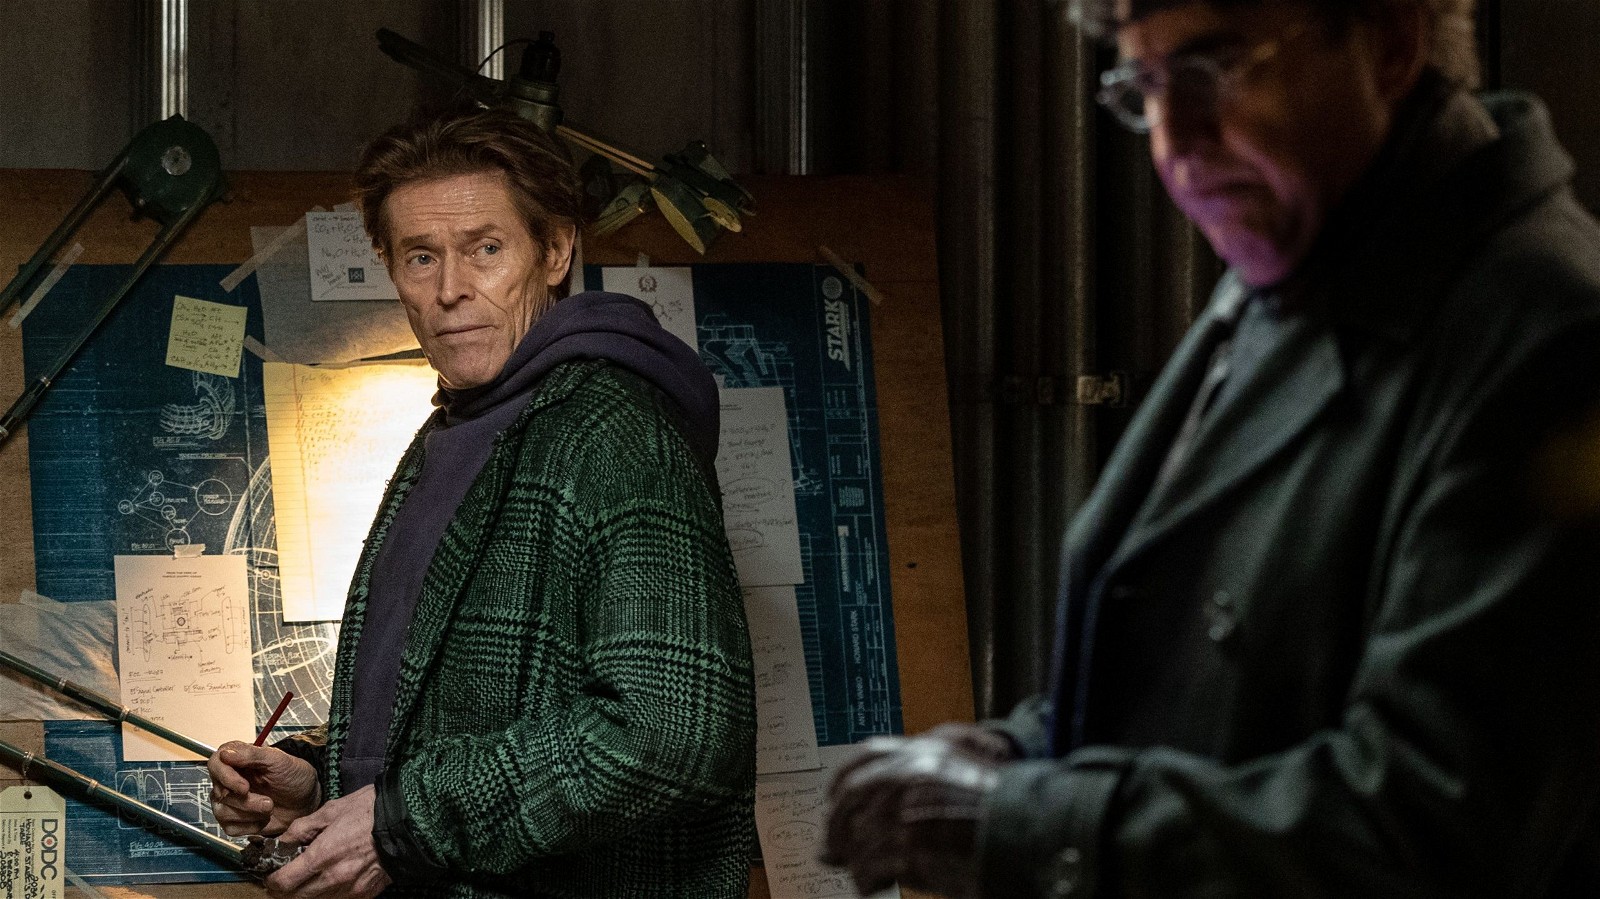 Willem Dafoe Didn't Want 'Spider-Man' Return to Be 'Contrived' Cameo